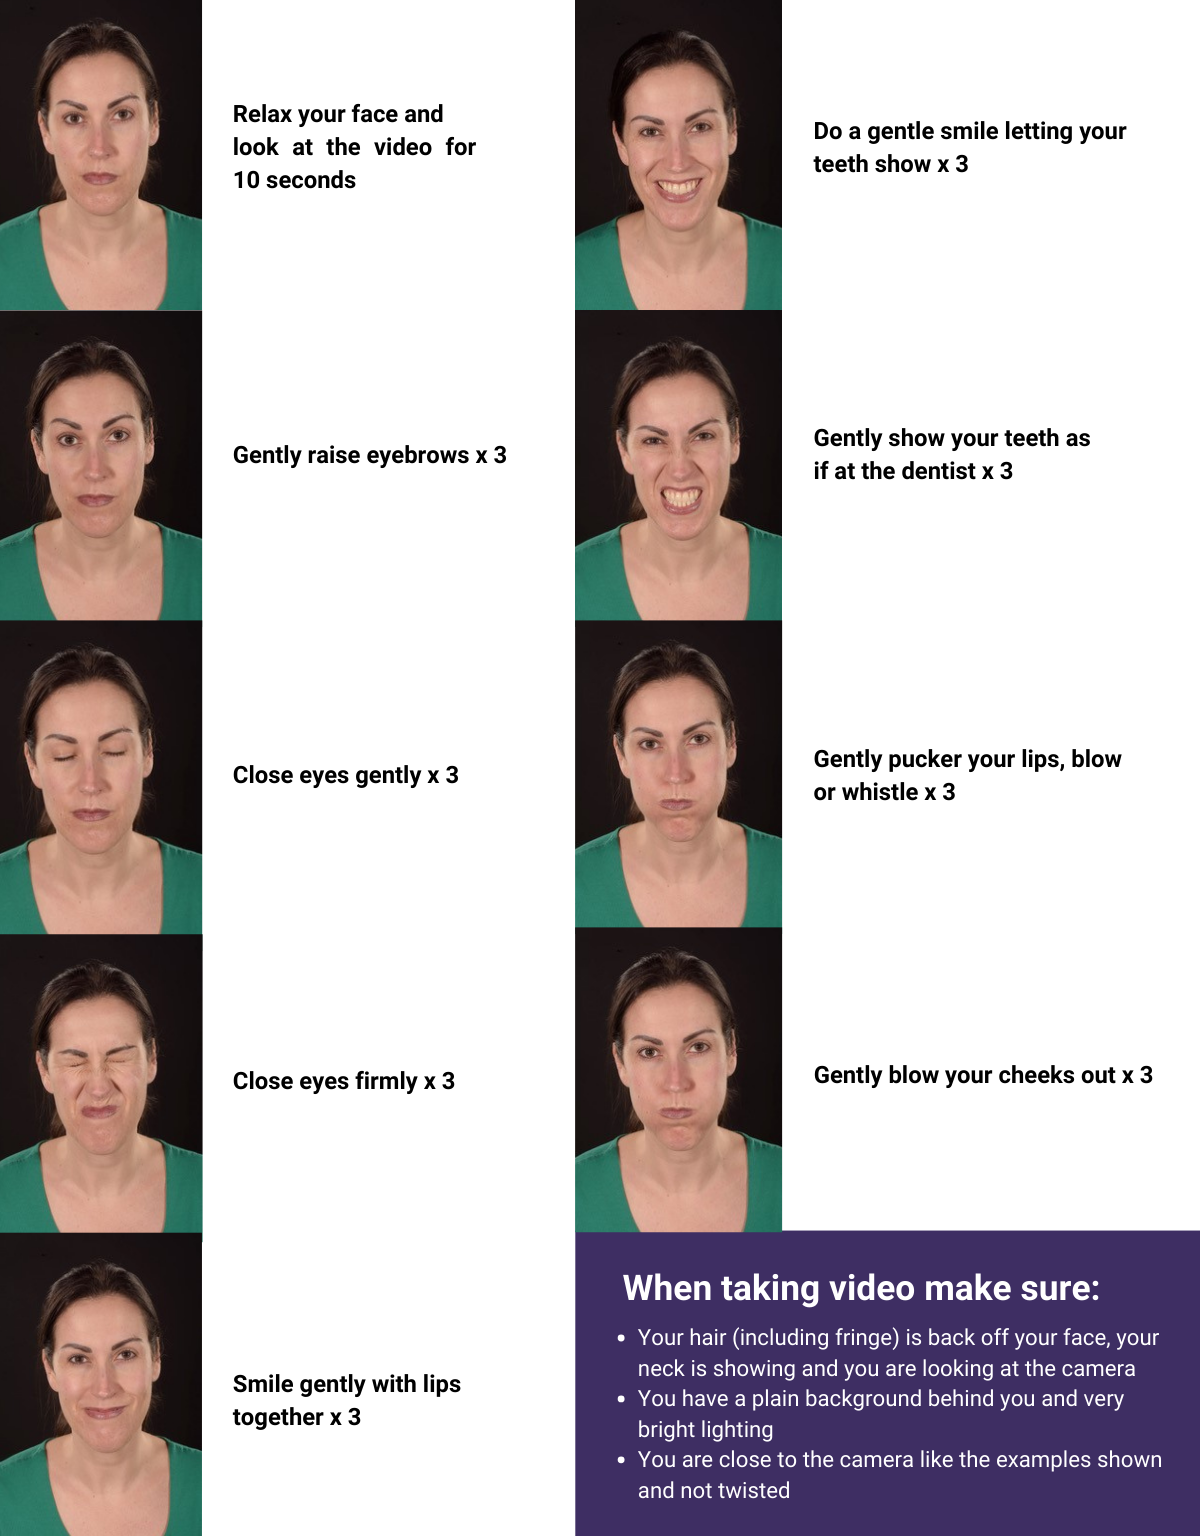 Image showing different facial expressions to make and record on video before an appointment for Botox